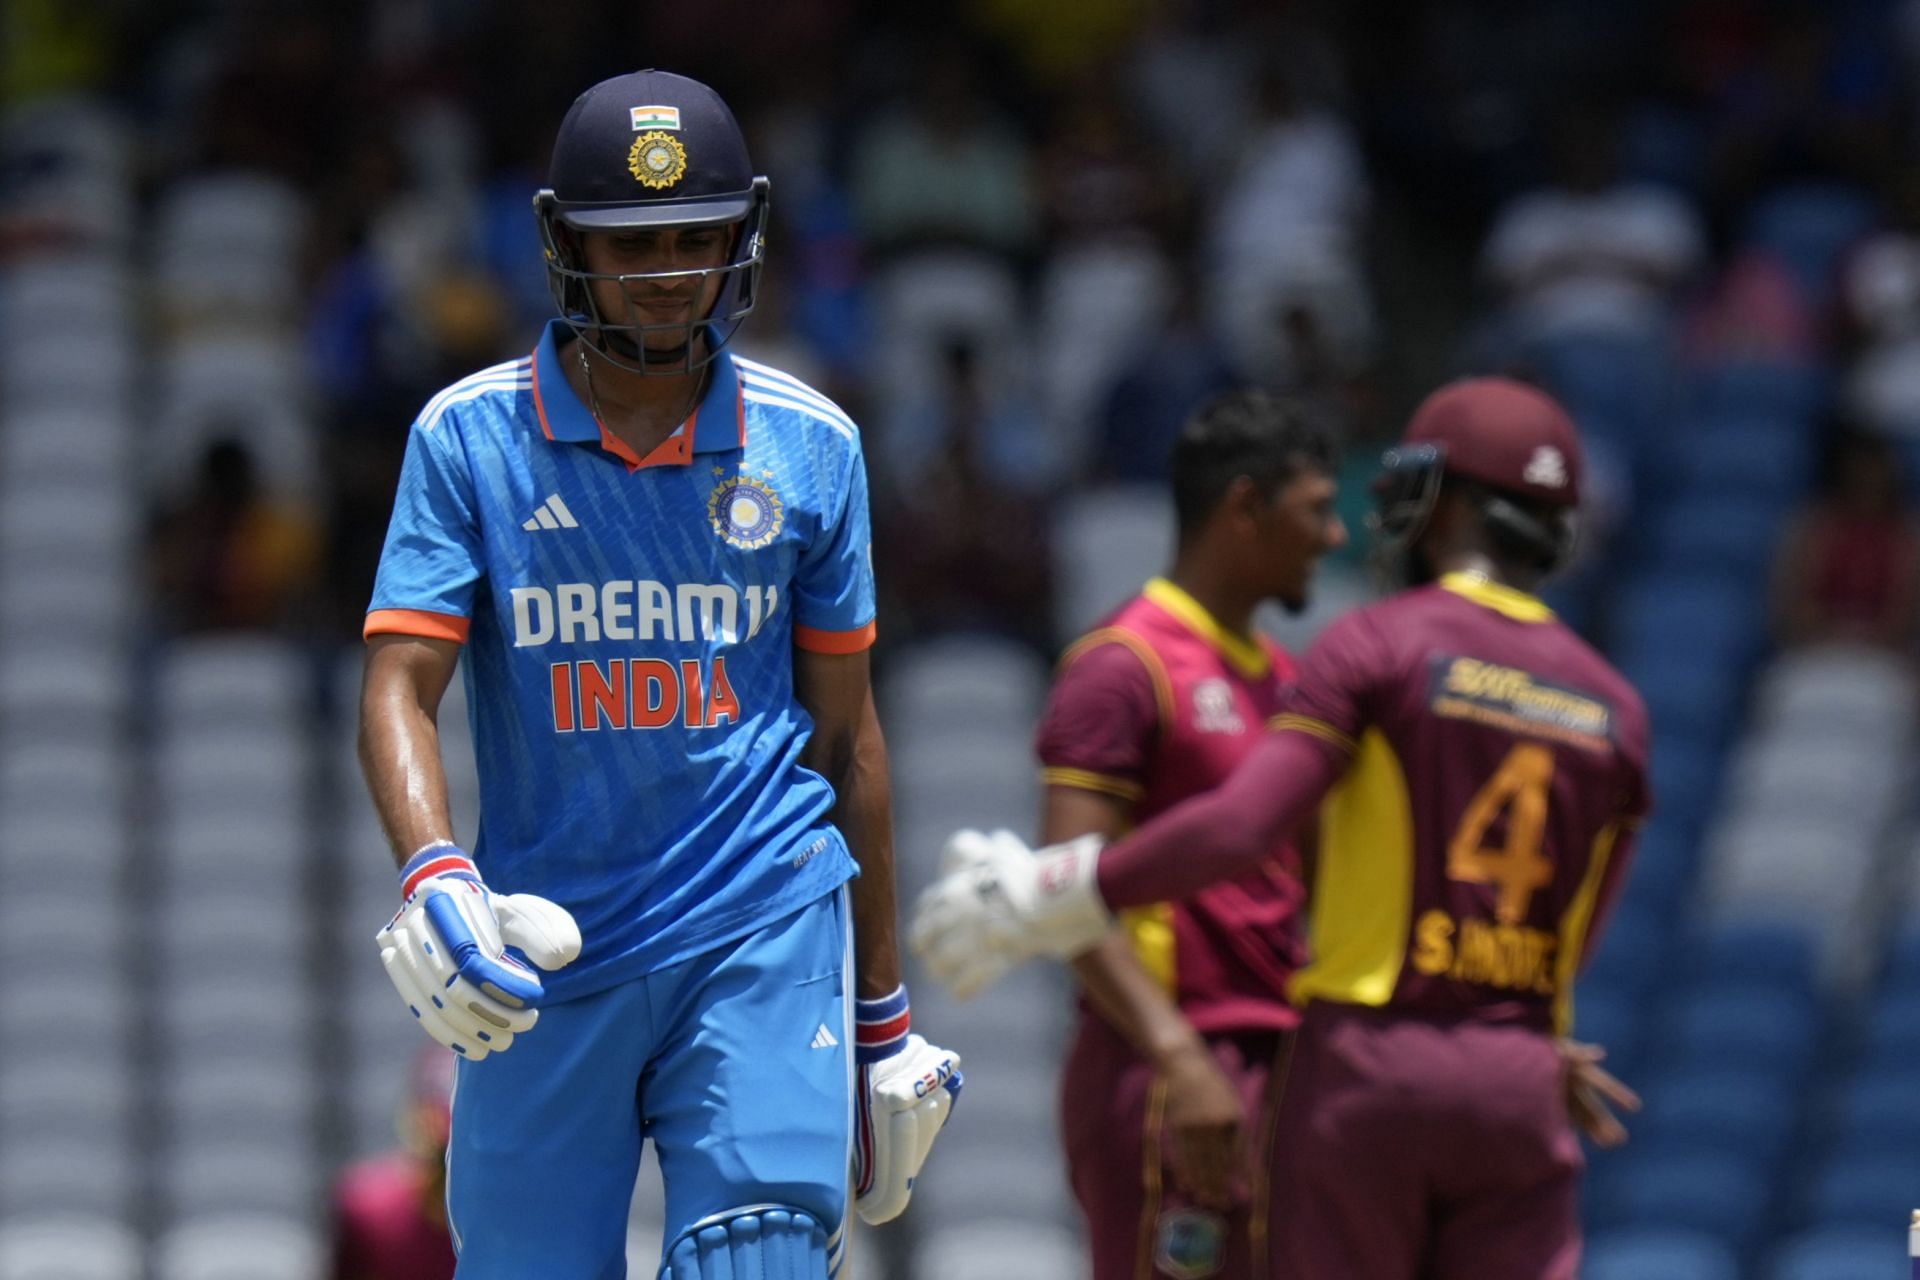 Shubman Gill had an indifferent tour of the West Indies.